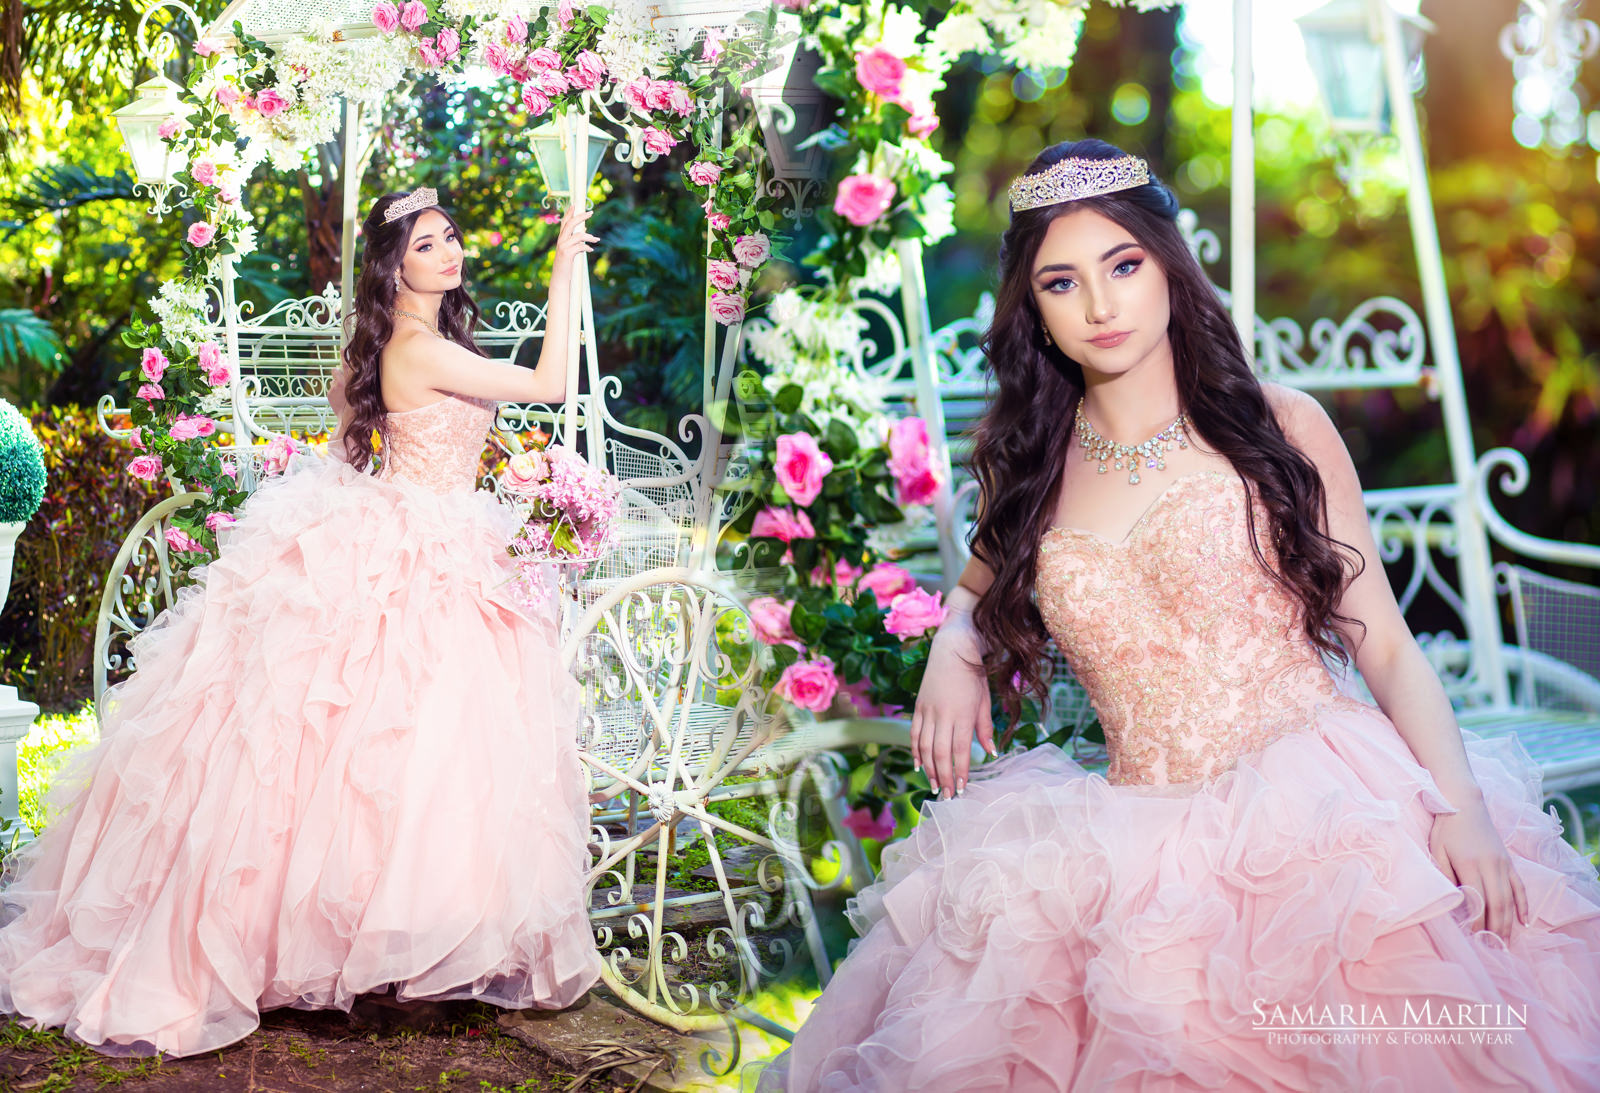 Samaria Photography, Quinceanera Photography, Quinceanera Photography Packages, Quinceanera photography Packages Miami, Quince Photography, Quinces Photos, Quinceanera Photo Studio, Professional Quinceañera Photography,